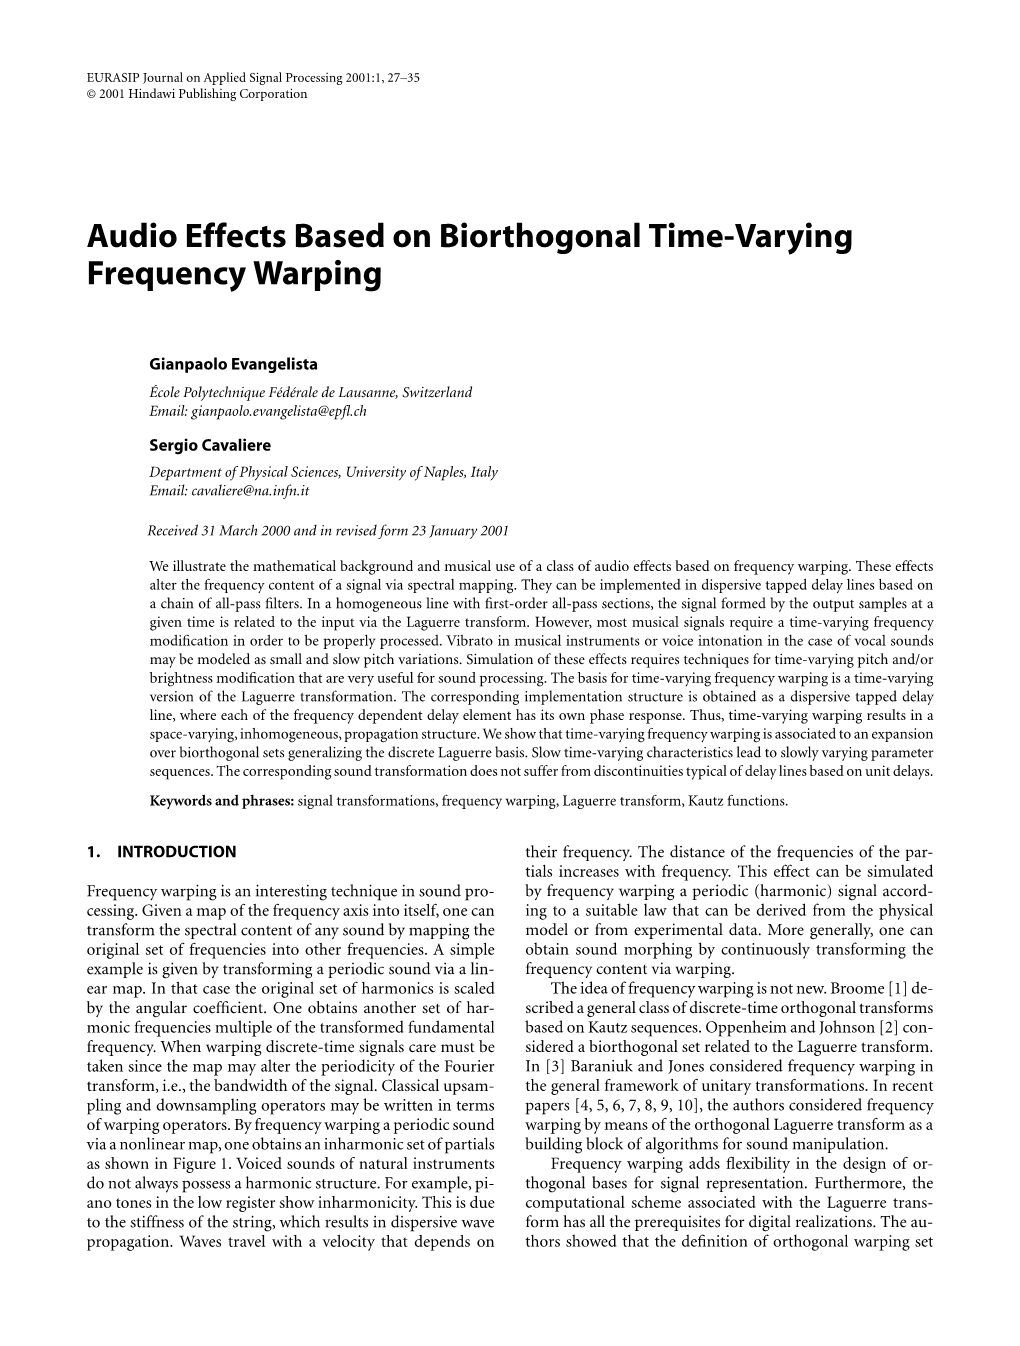 Audio Effects Based on Biorthogonal Time-Varying Frequency Warping